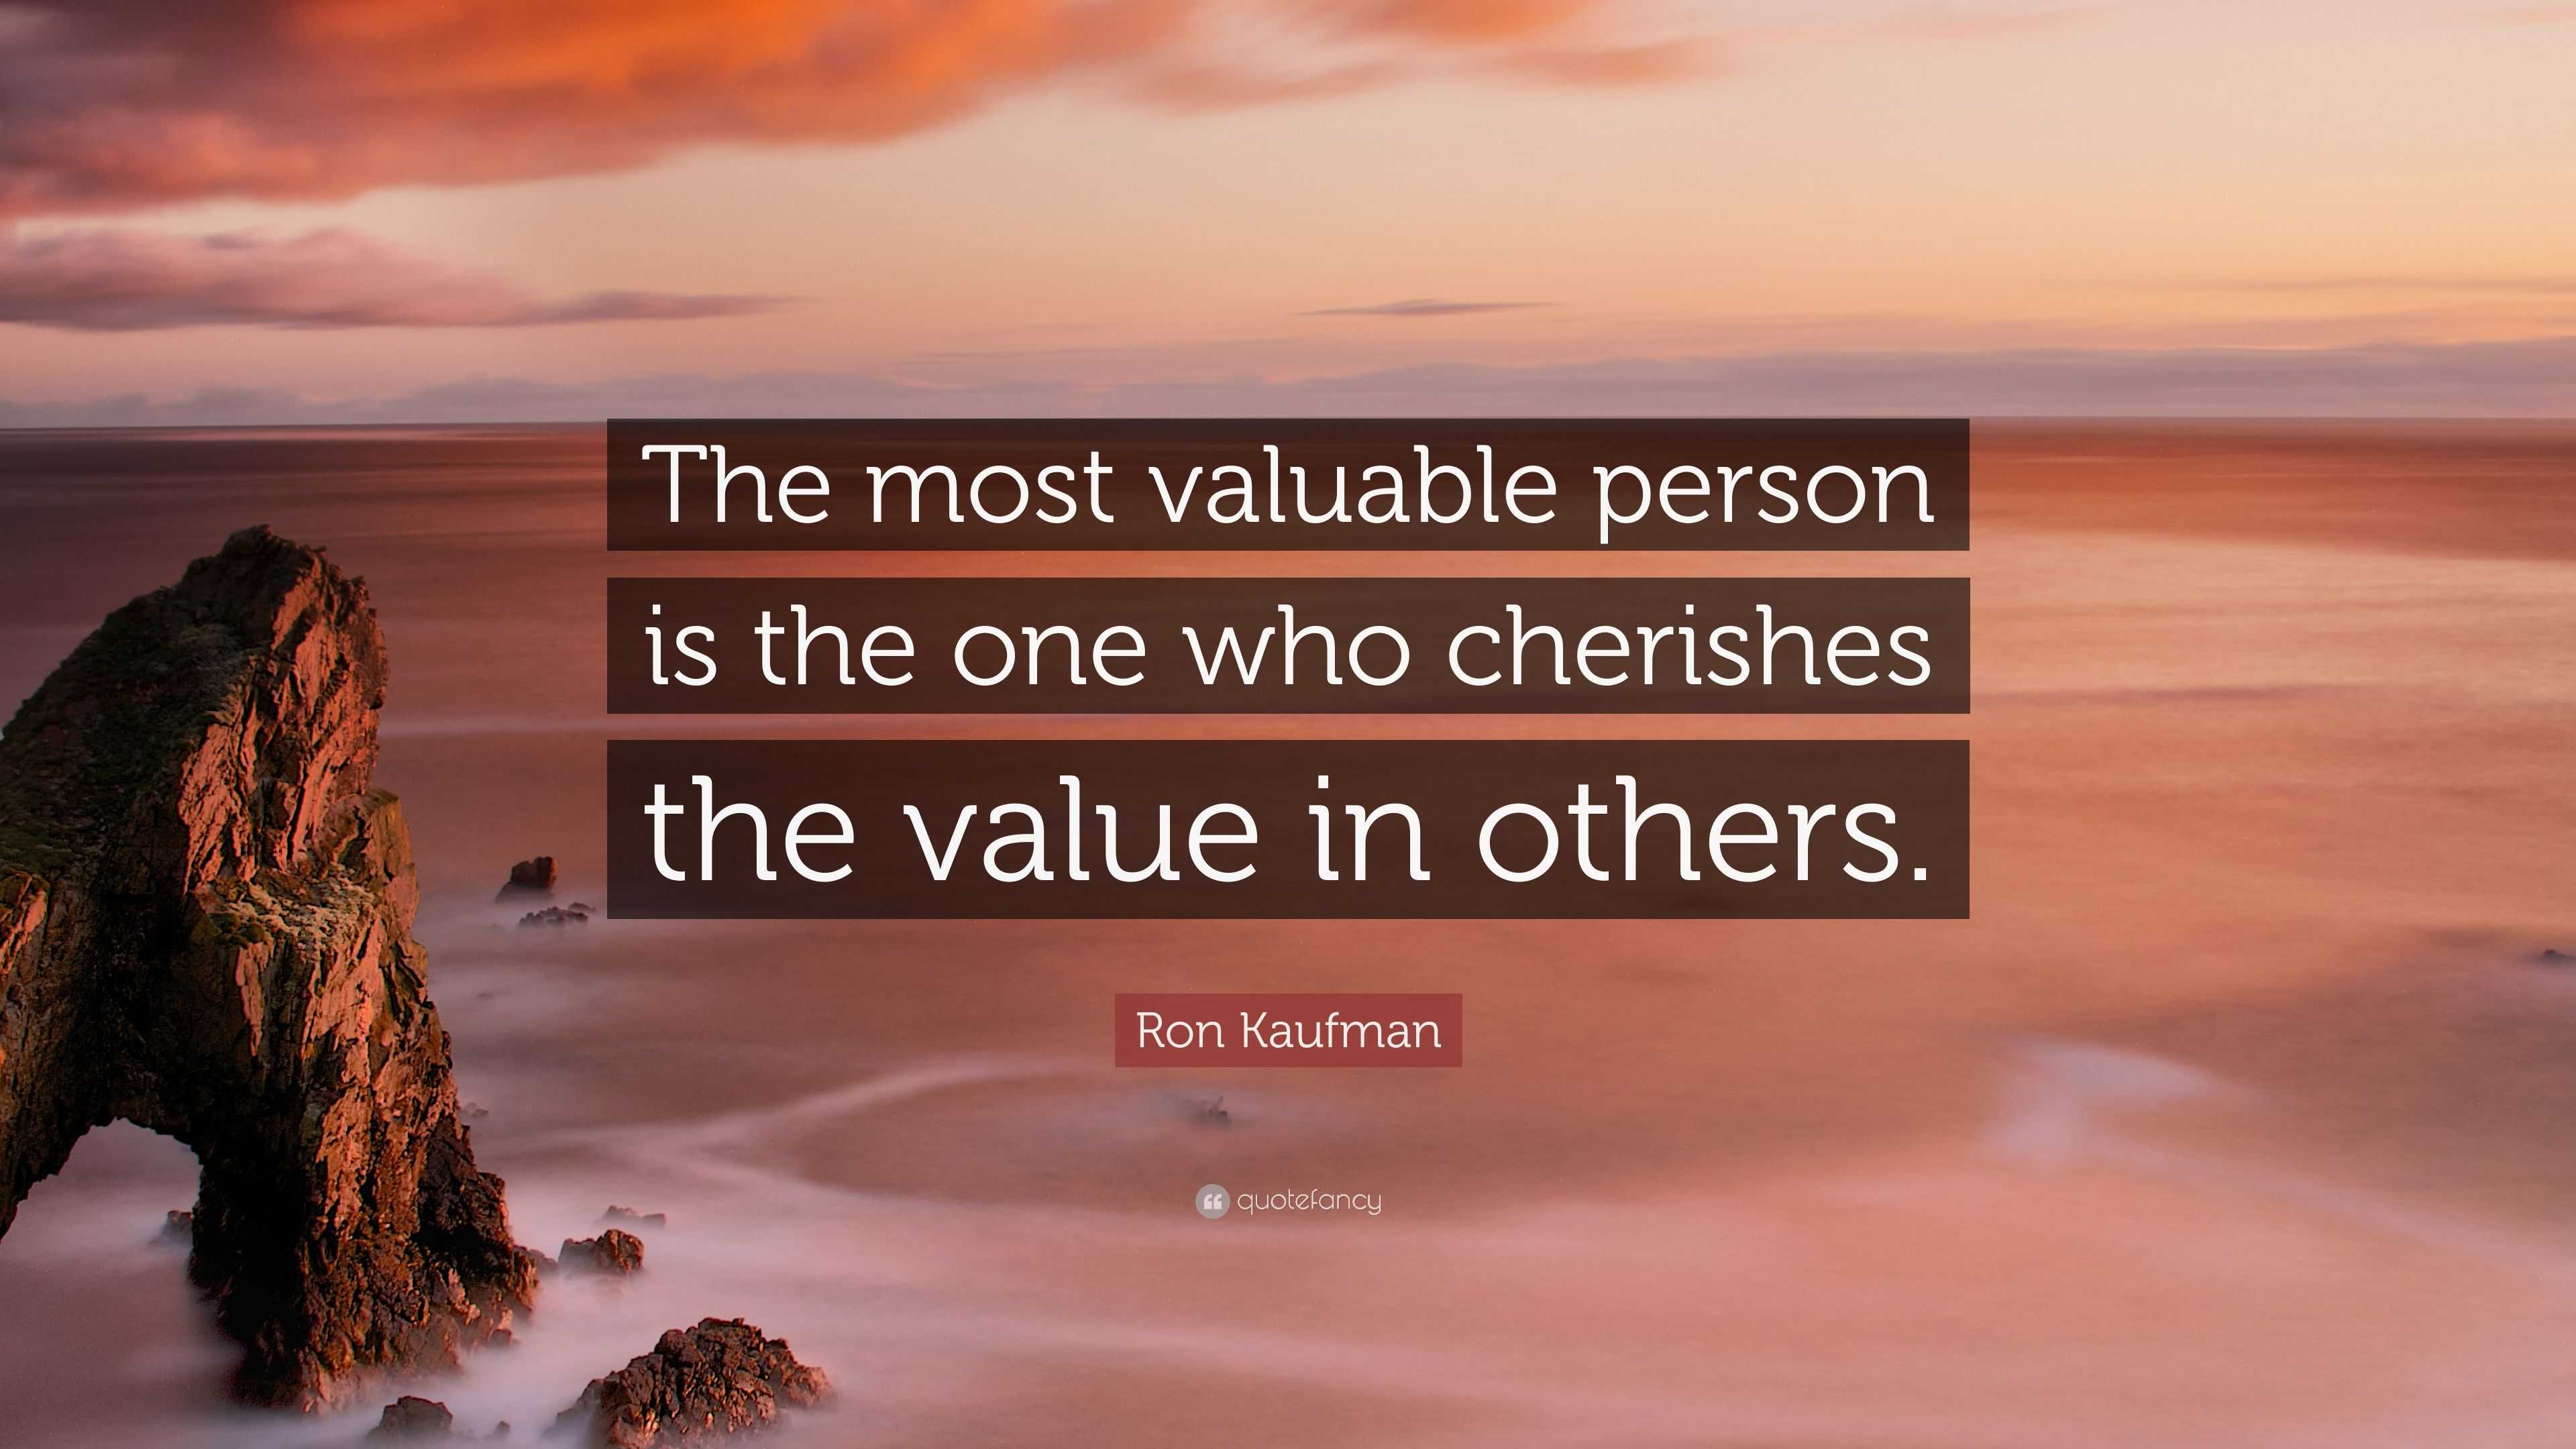 Ron Kaufman Quote “The most valuable person is the one who cherishes